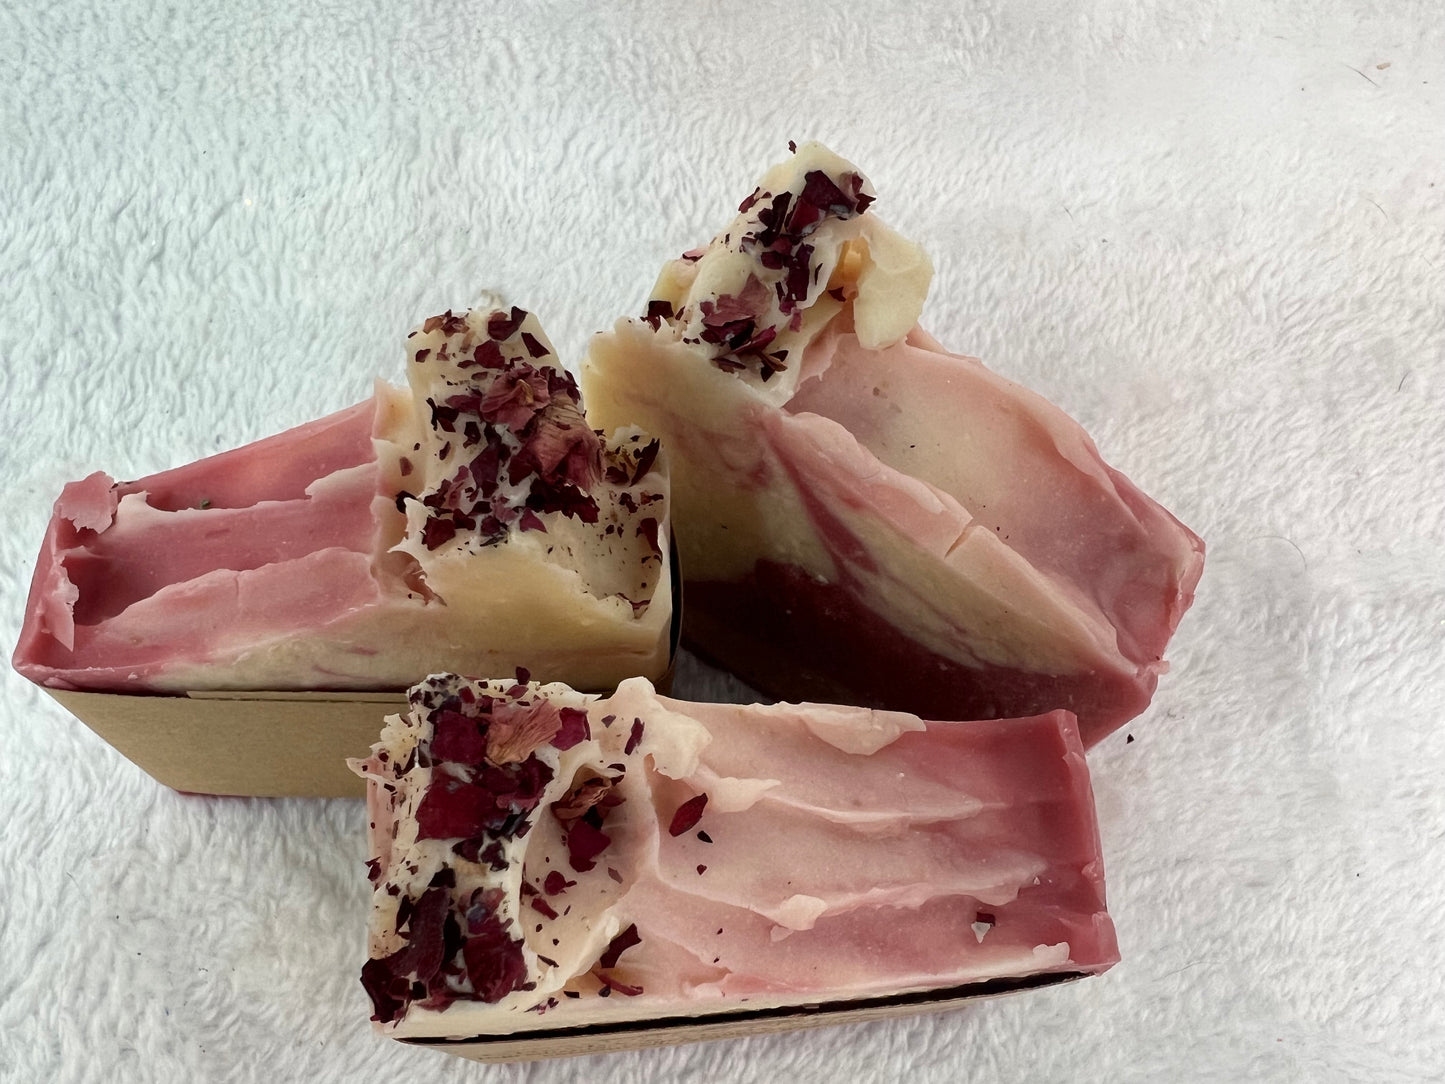 Passionate Pink Peony - Handcrafted Goat Milk Soap